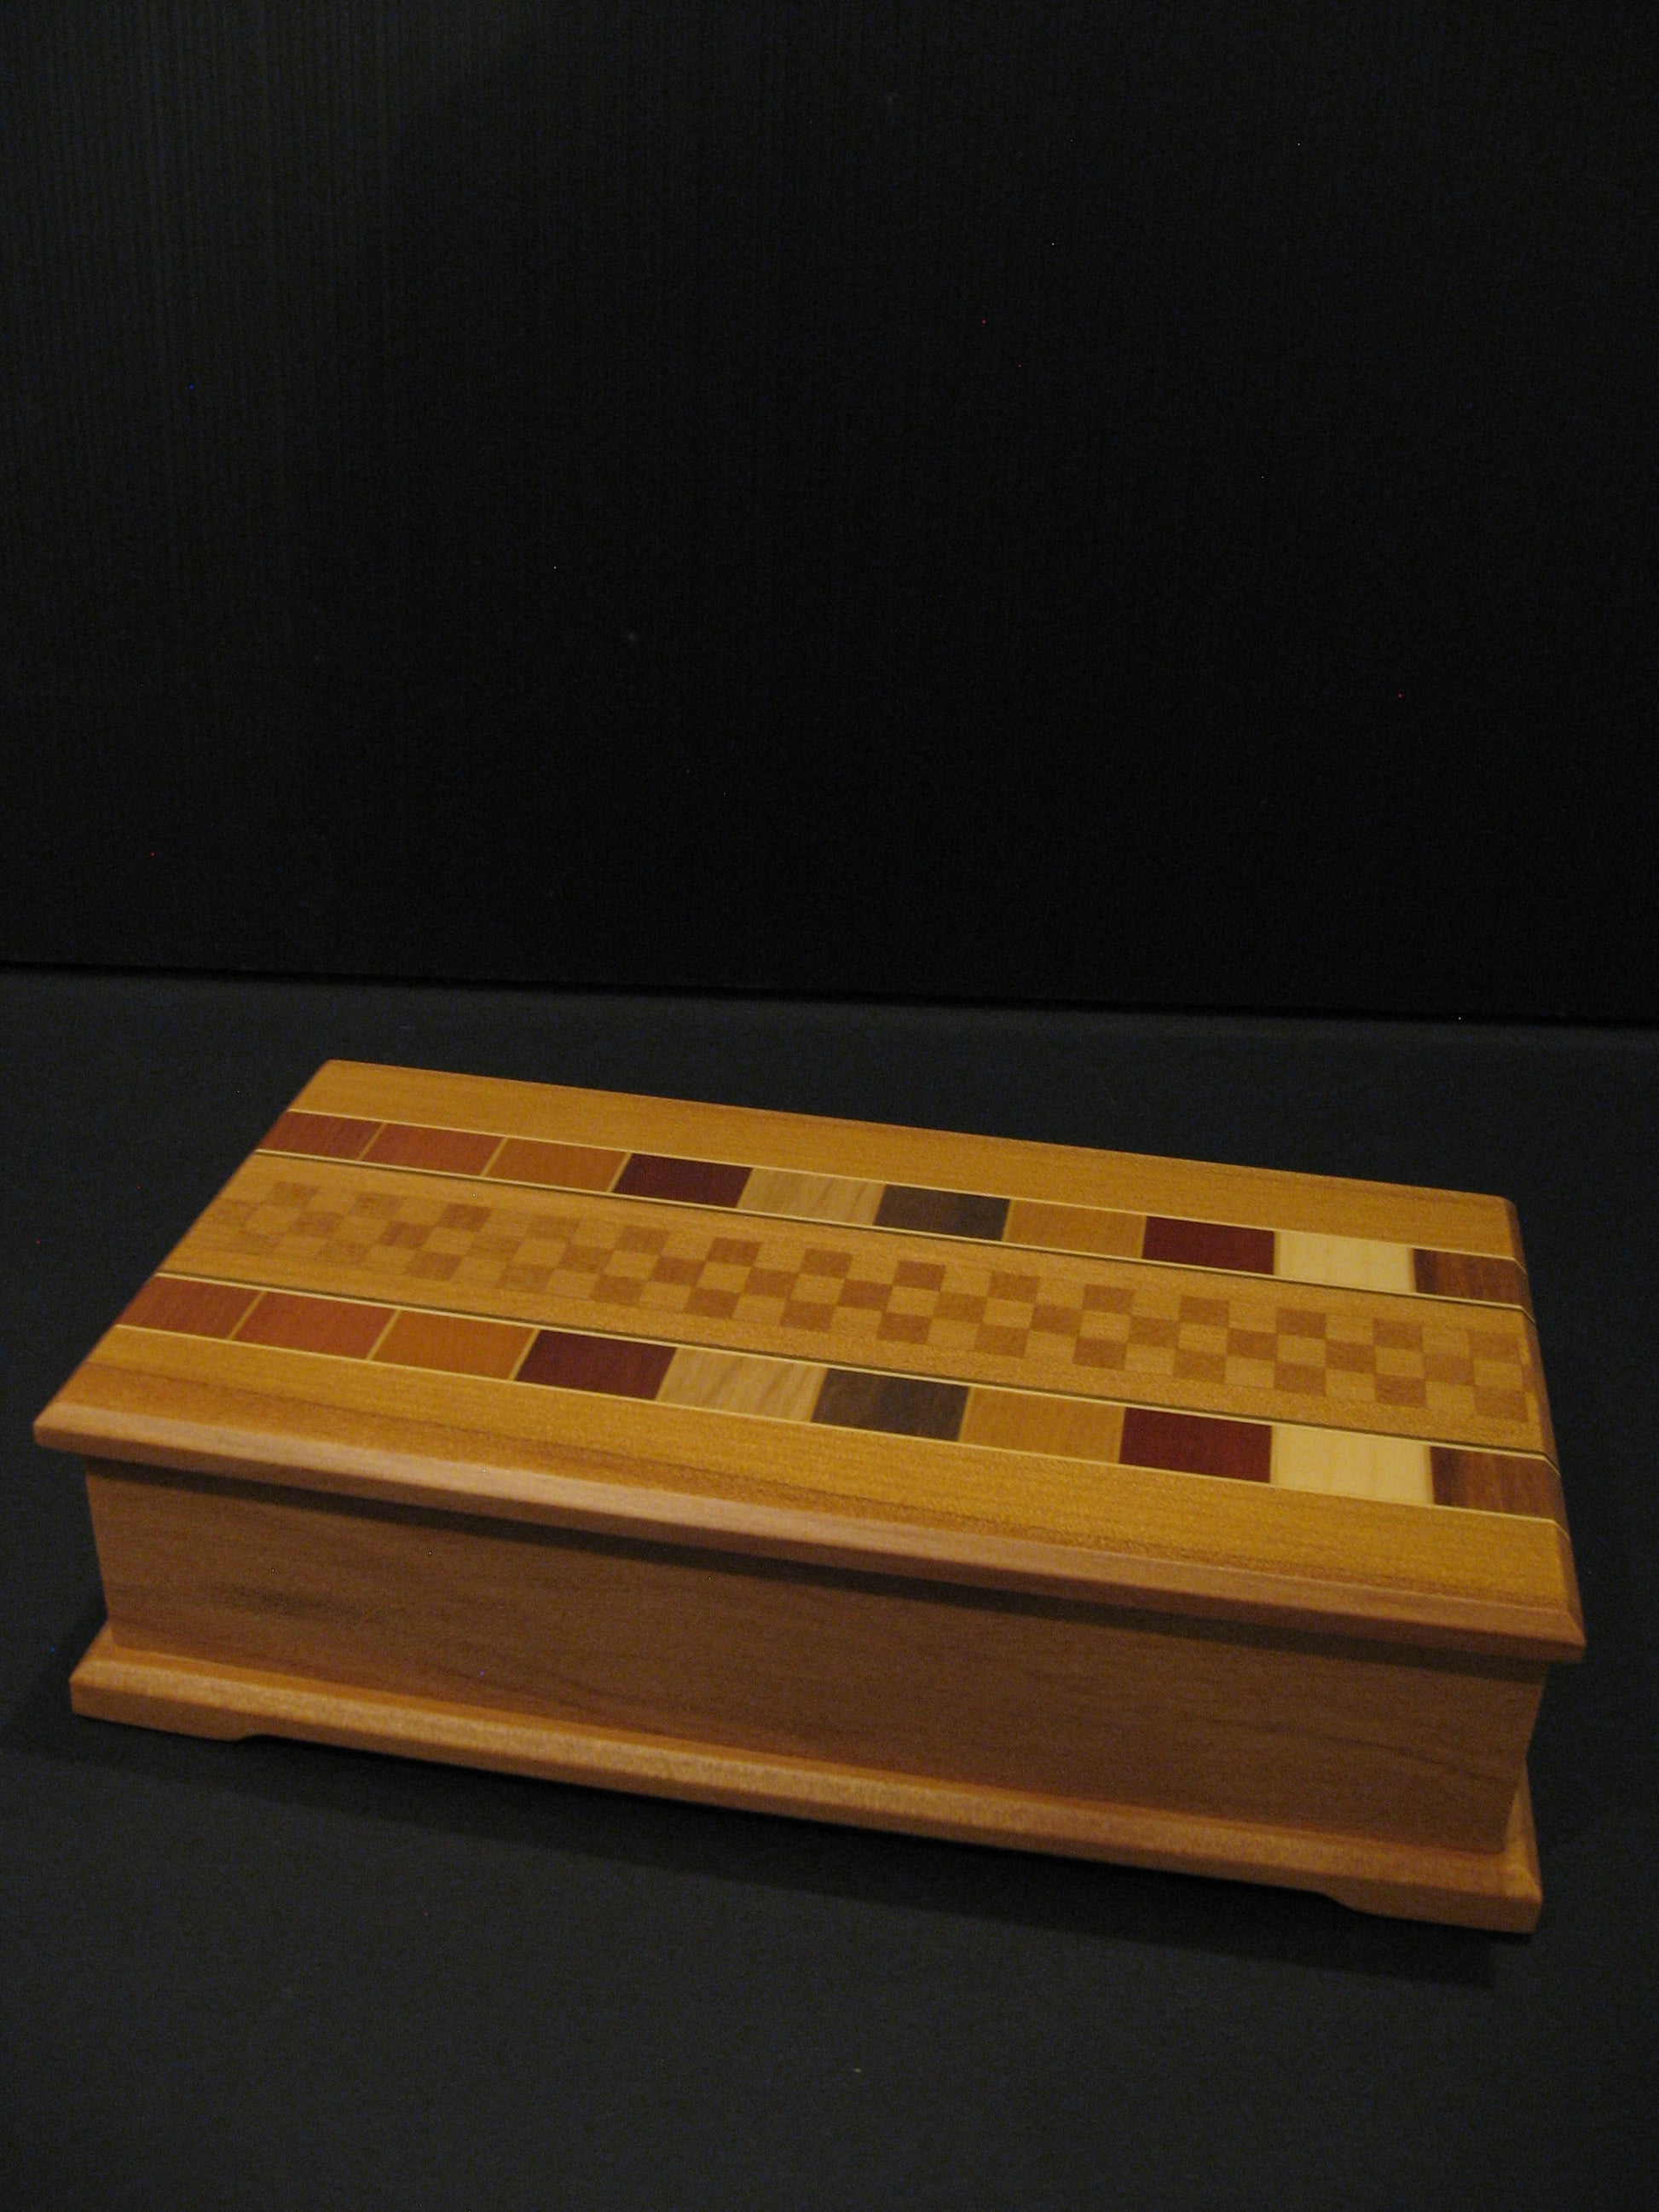 Kauri Wood Jewellery Box Inlaid with Native Timbers by Timber Arts NZ Silver Fern Gallery